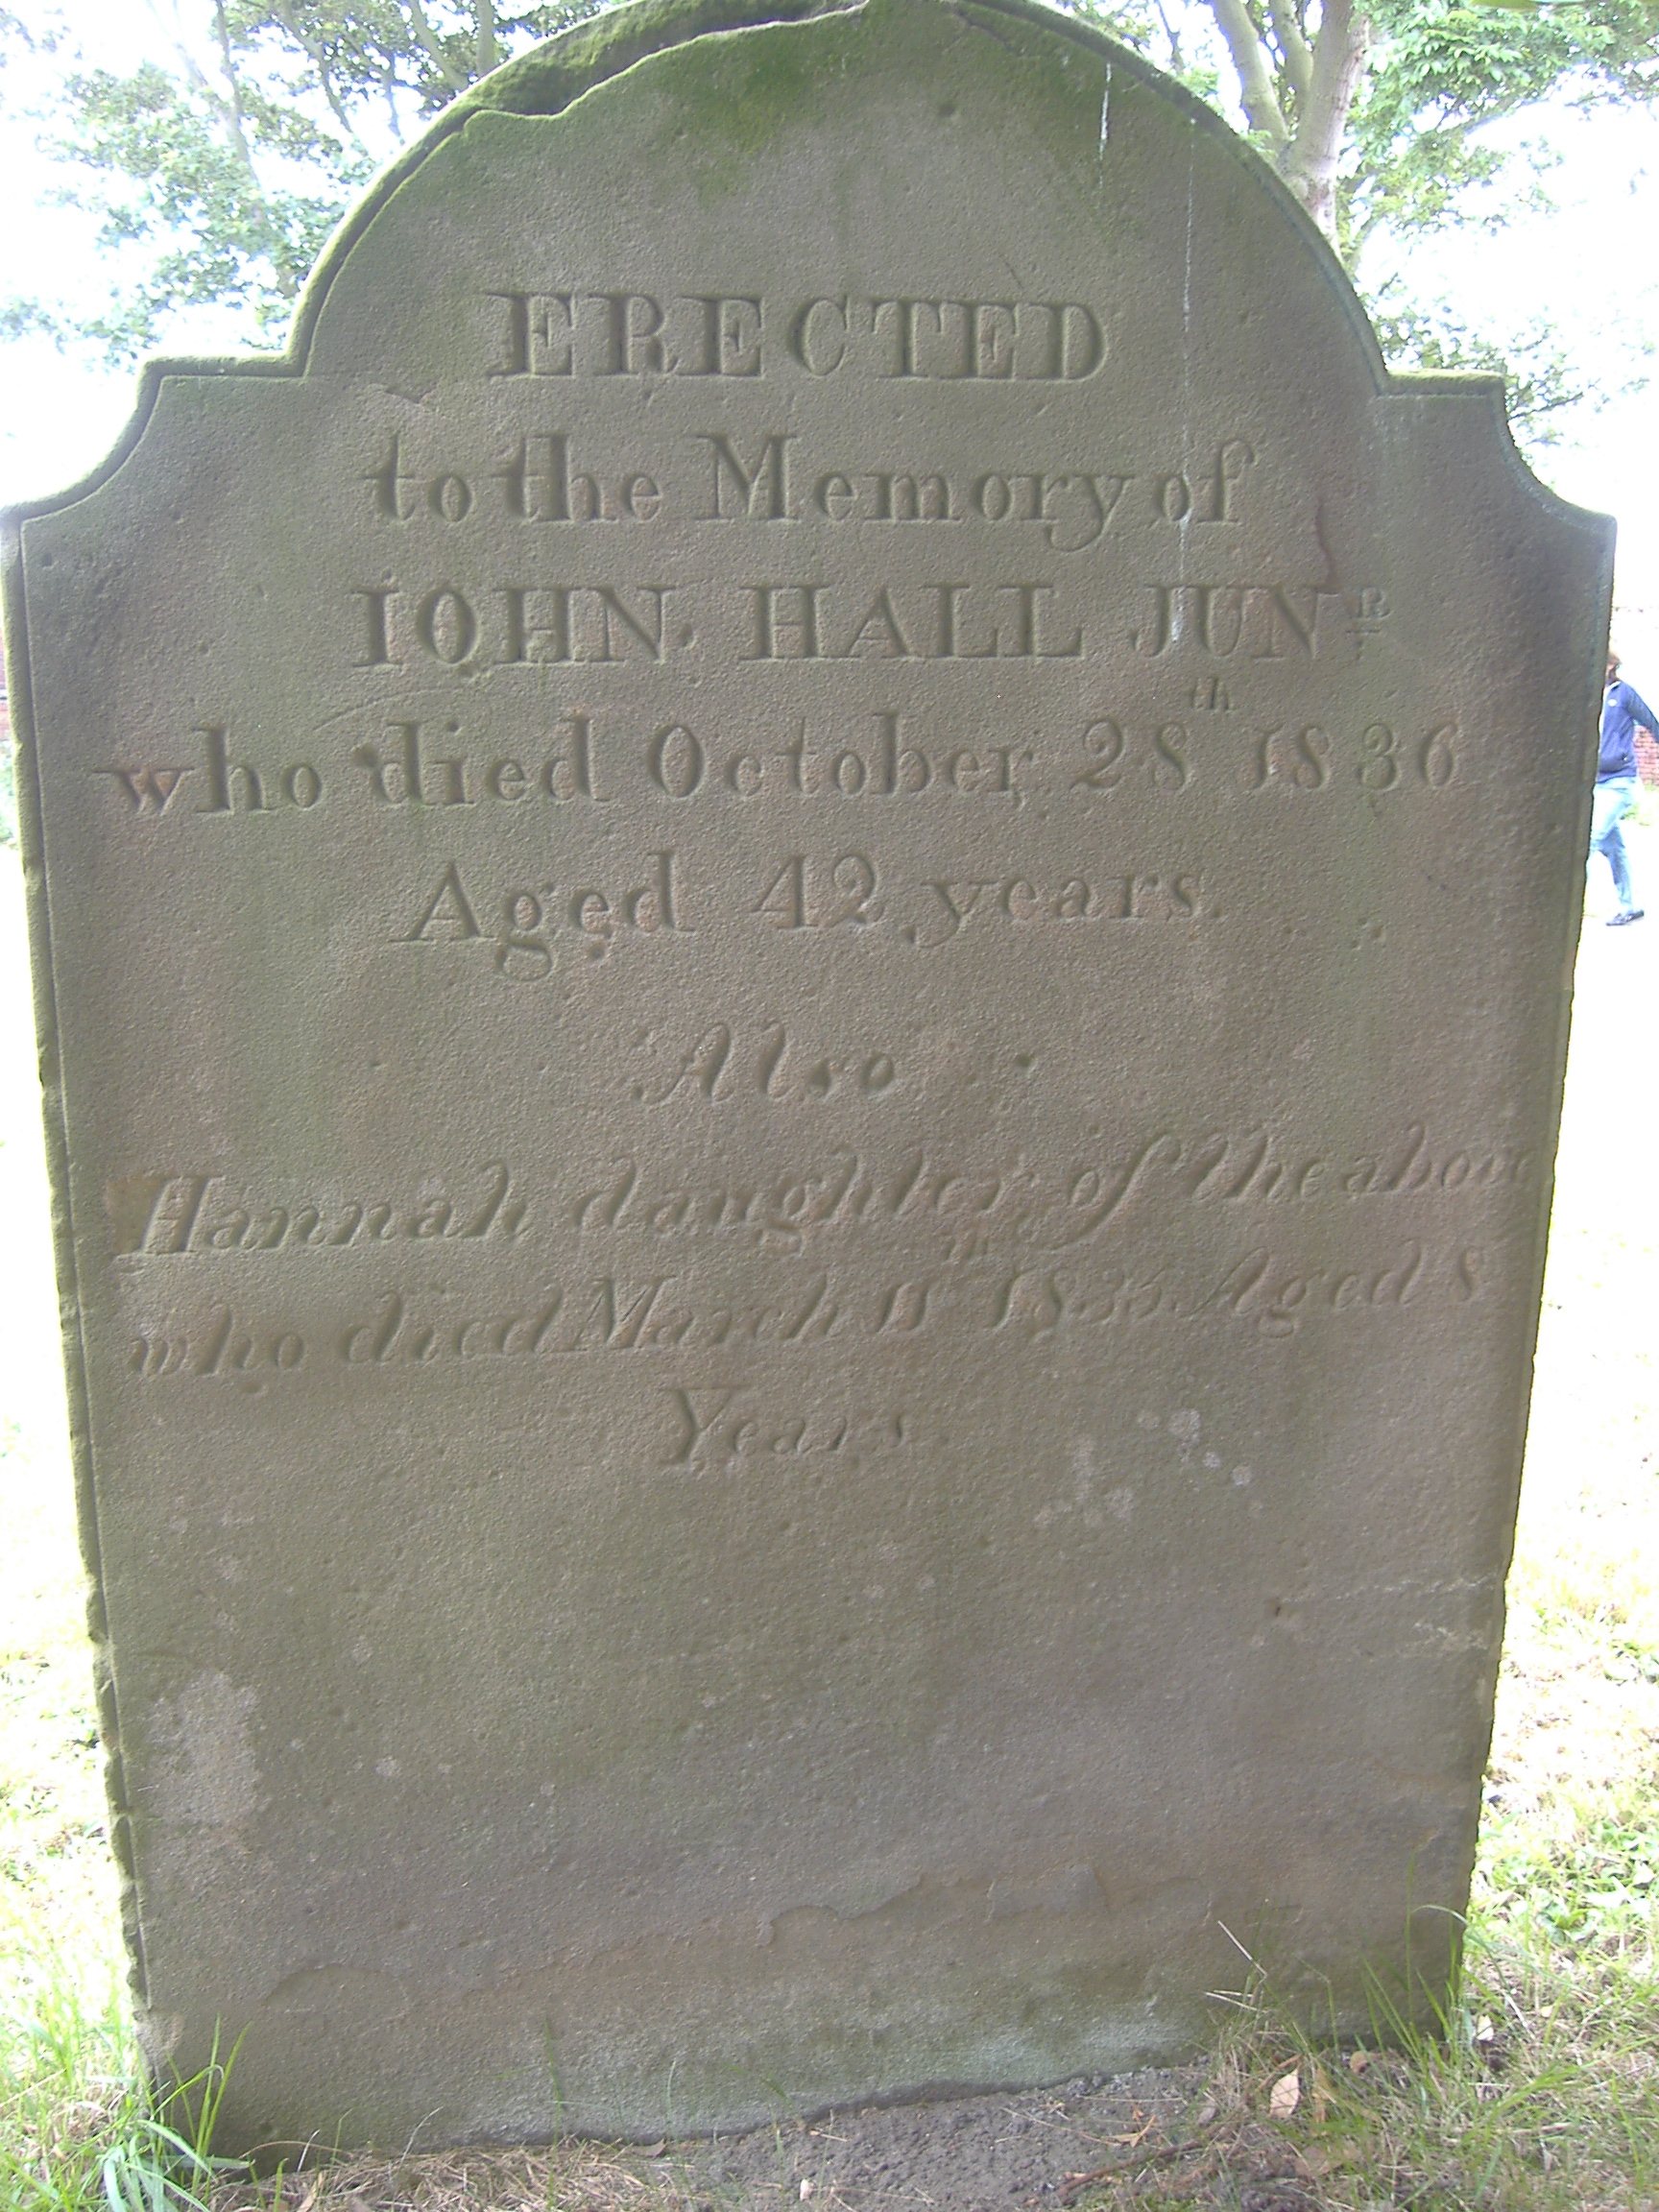 The gravestone of John Hall jnr and his daughter Hannah